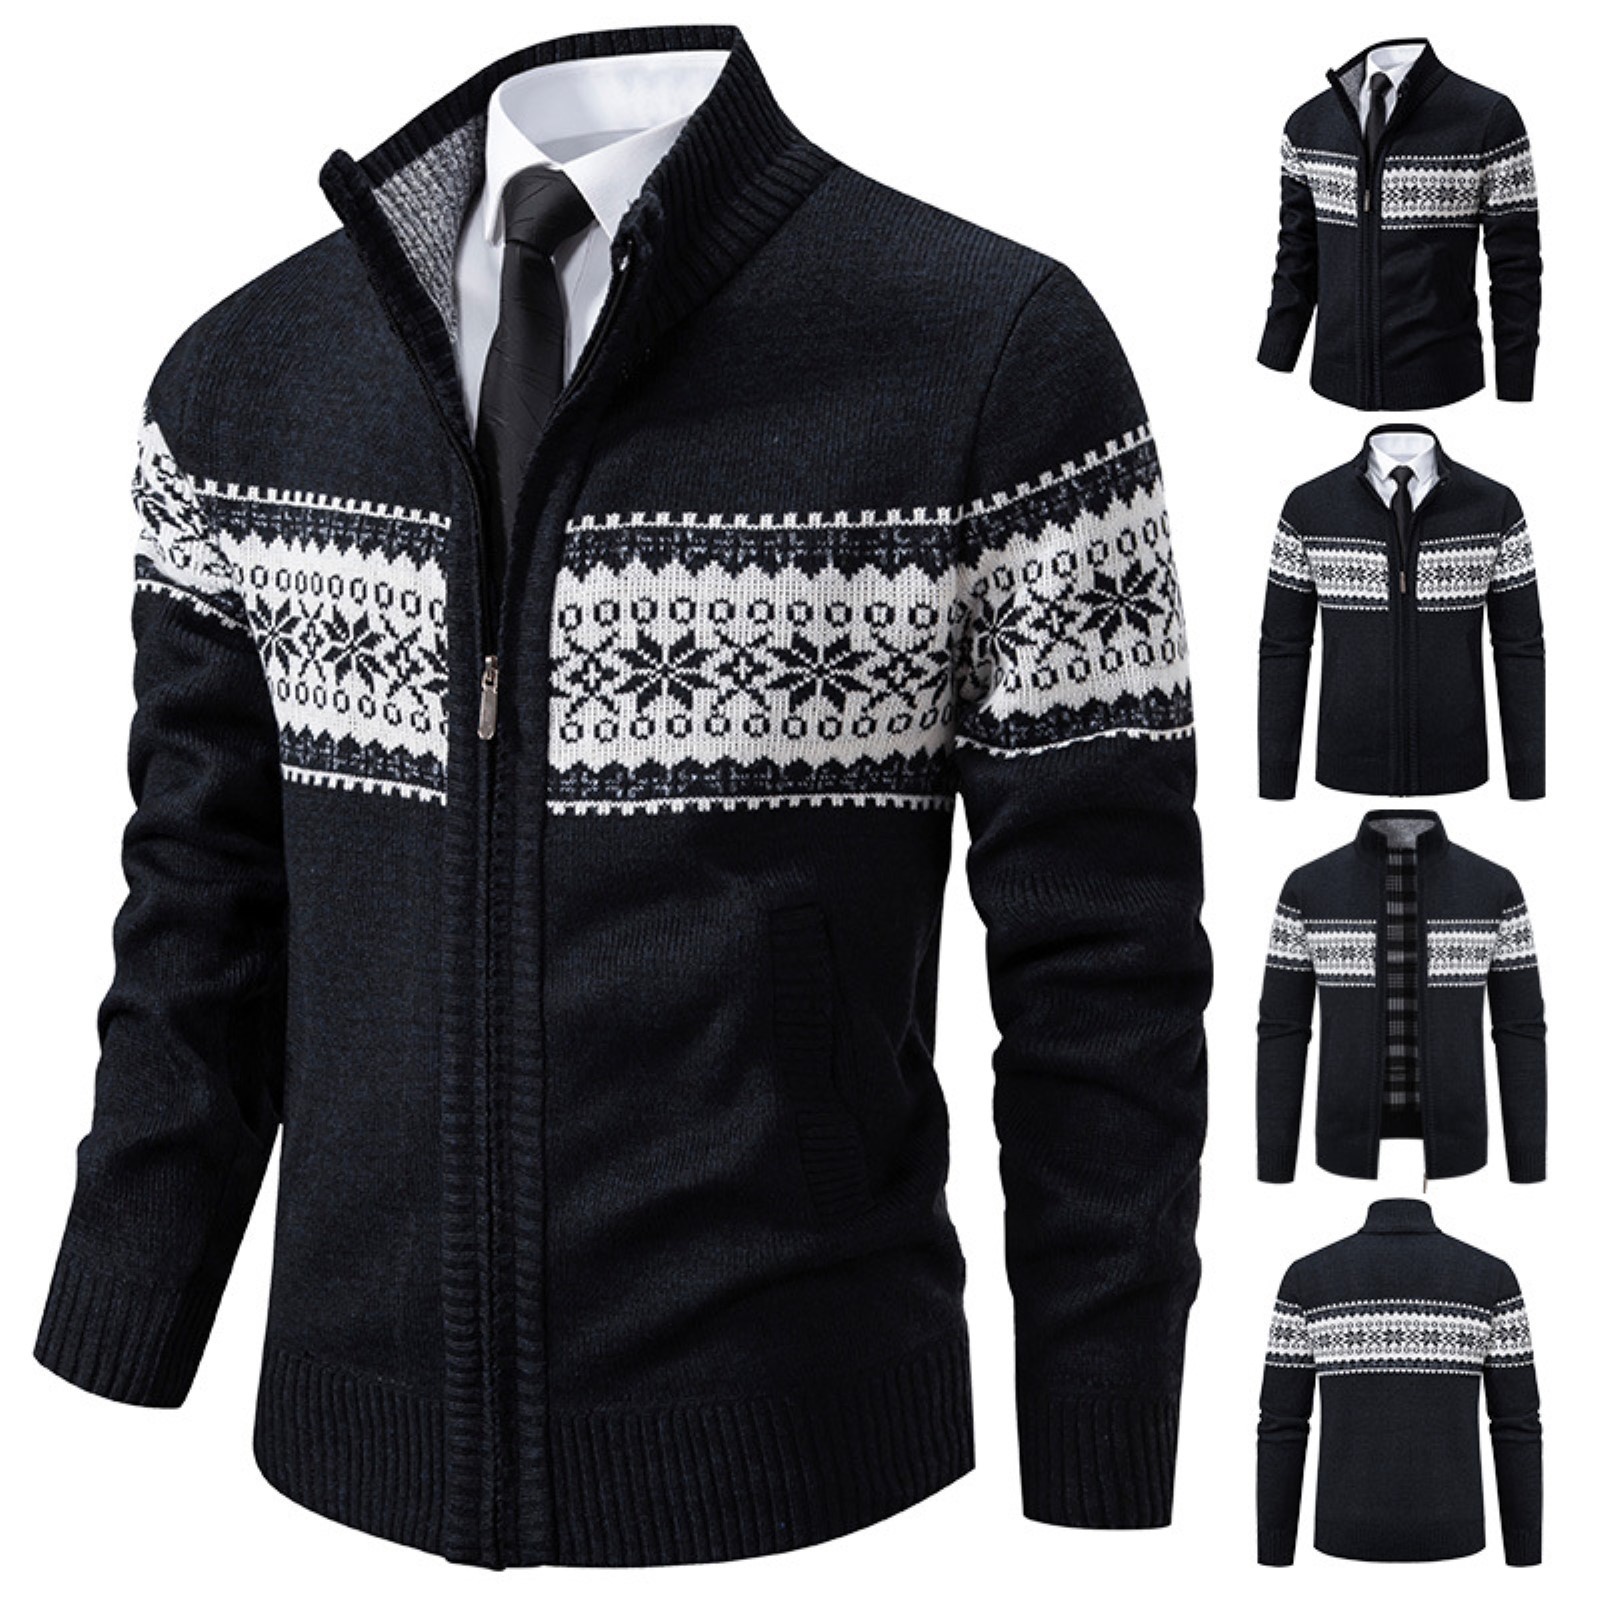 rinsvye Male Winter Fashion Sweater Jacket Long Sleeve Thick High Neck ...